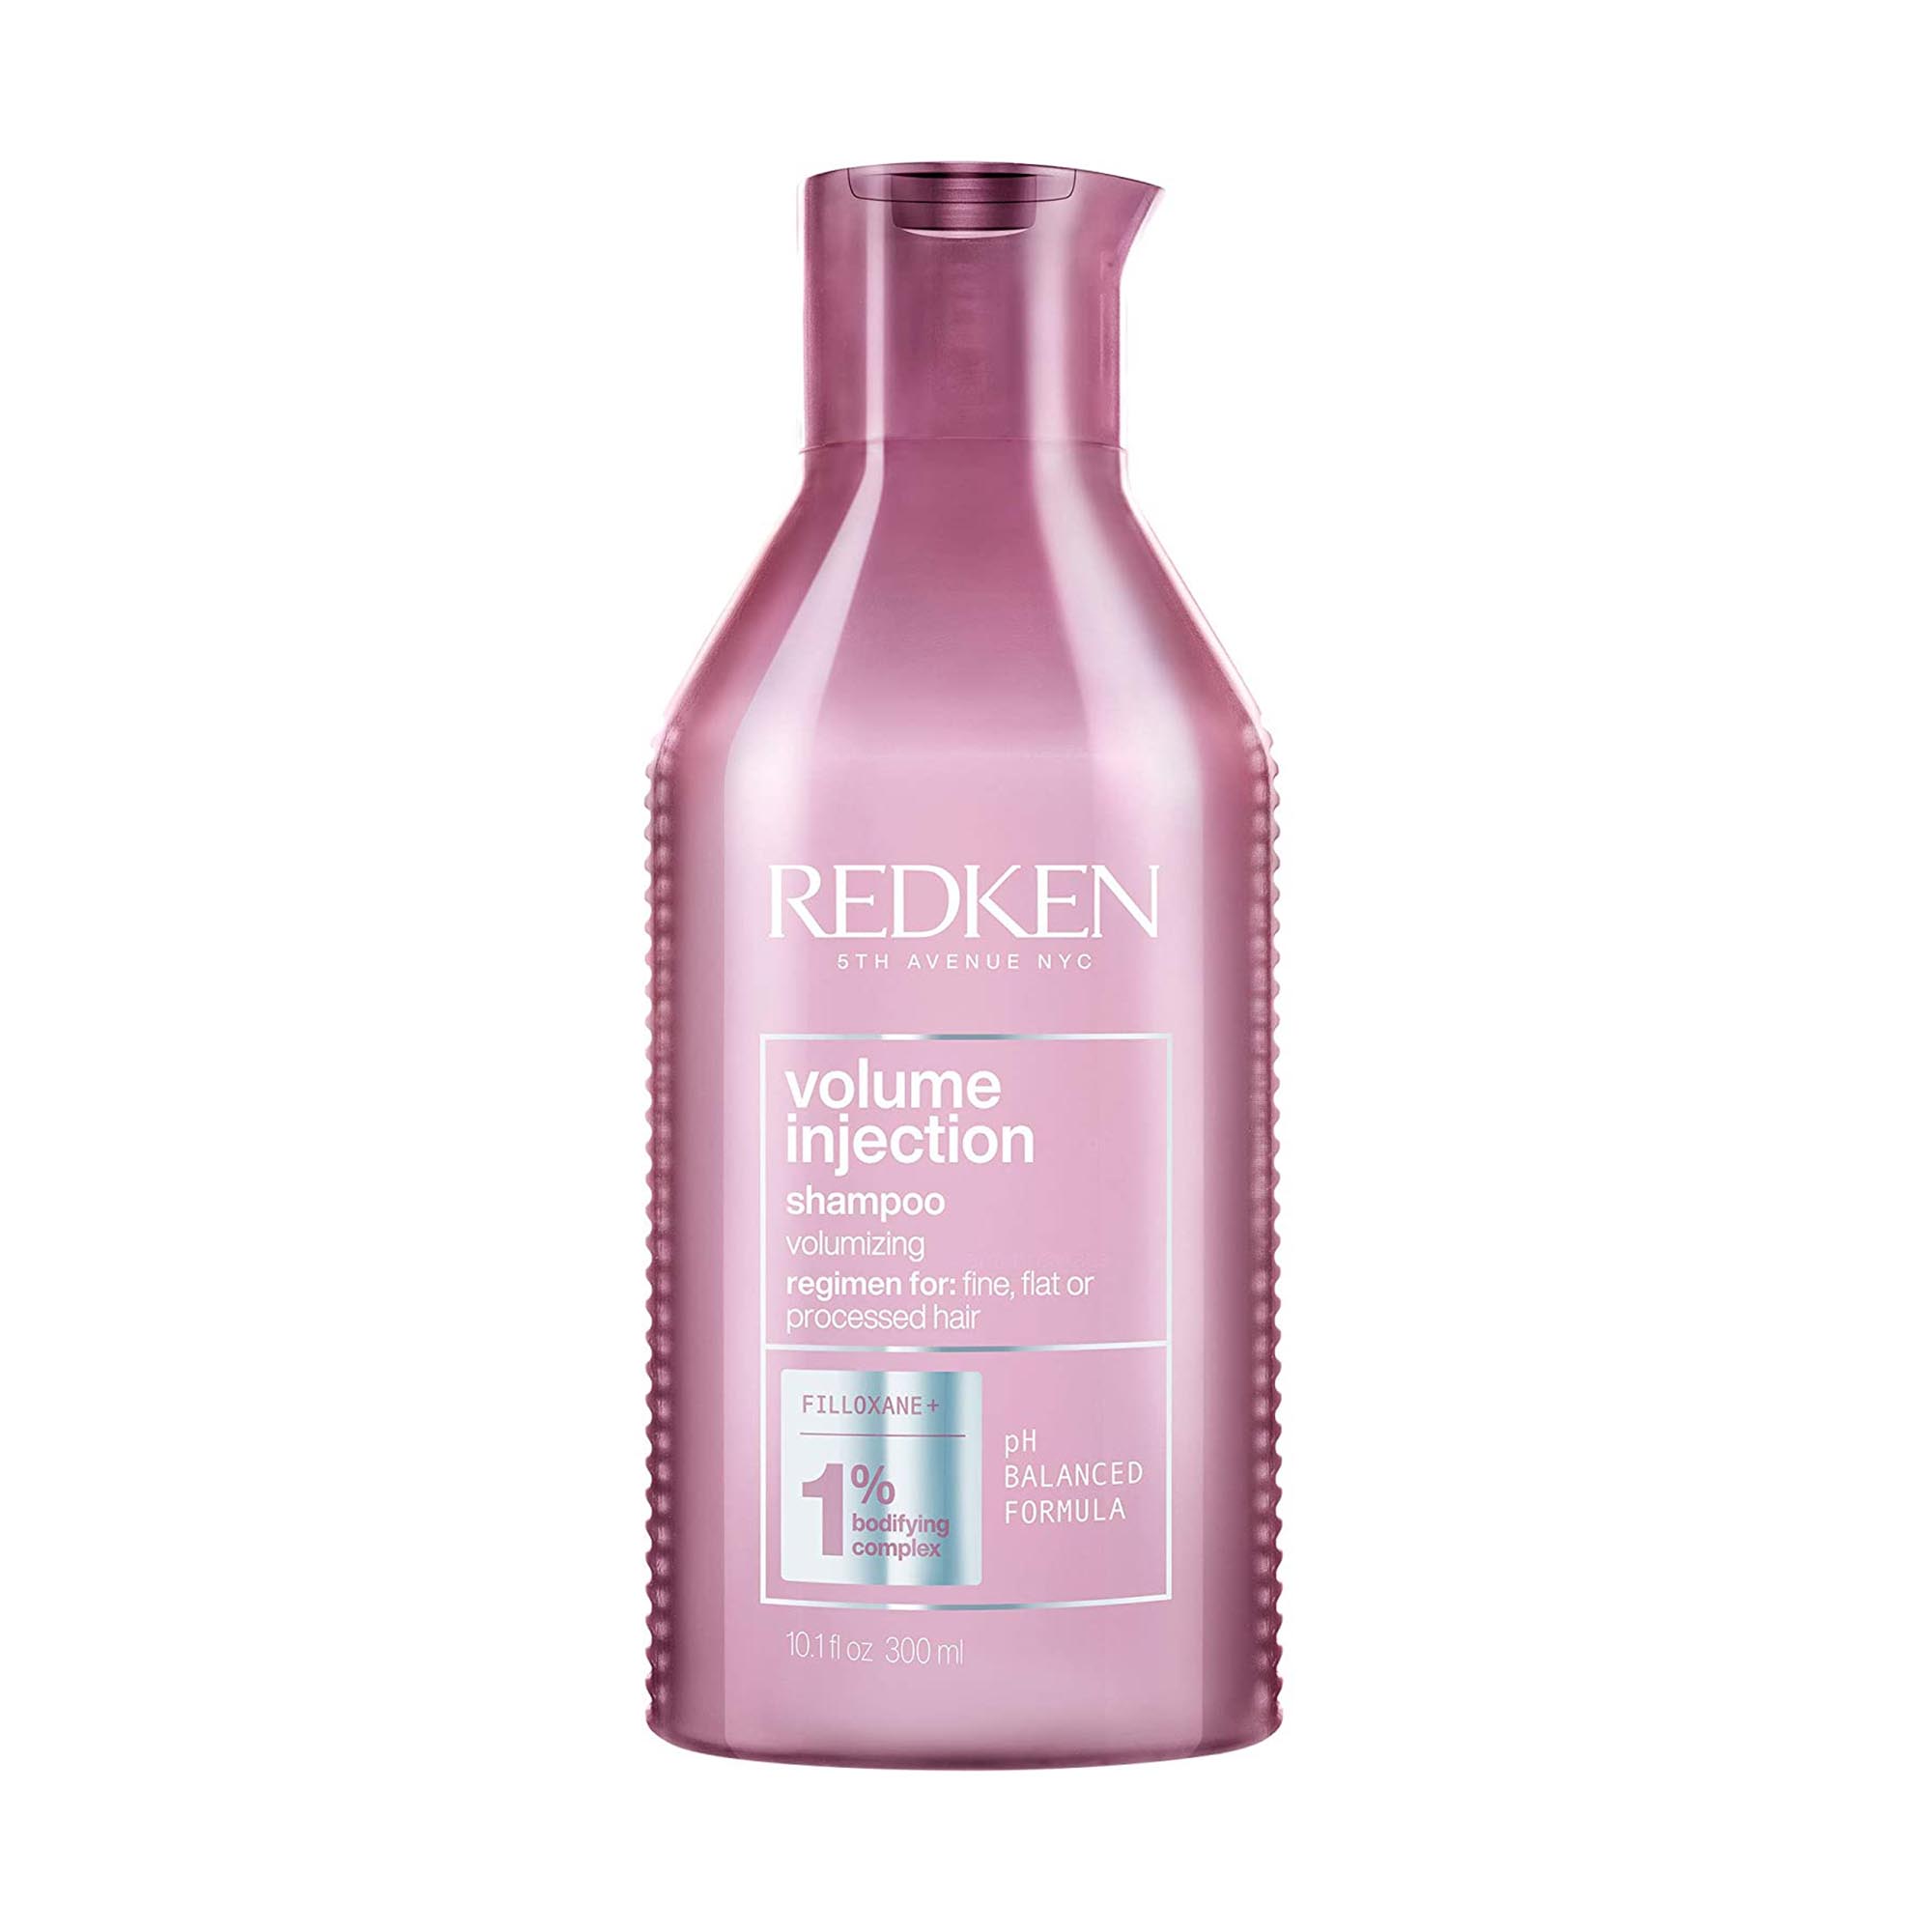 Redken Volume Injection Shampoo and Conditioner Duo - 10oz ($52 Value) / 10OZ